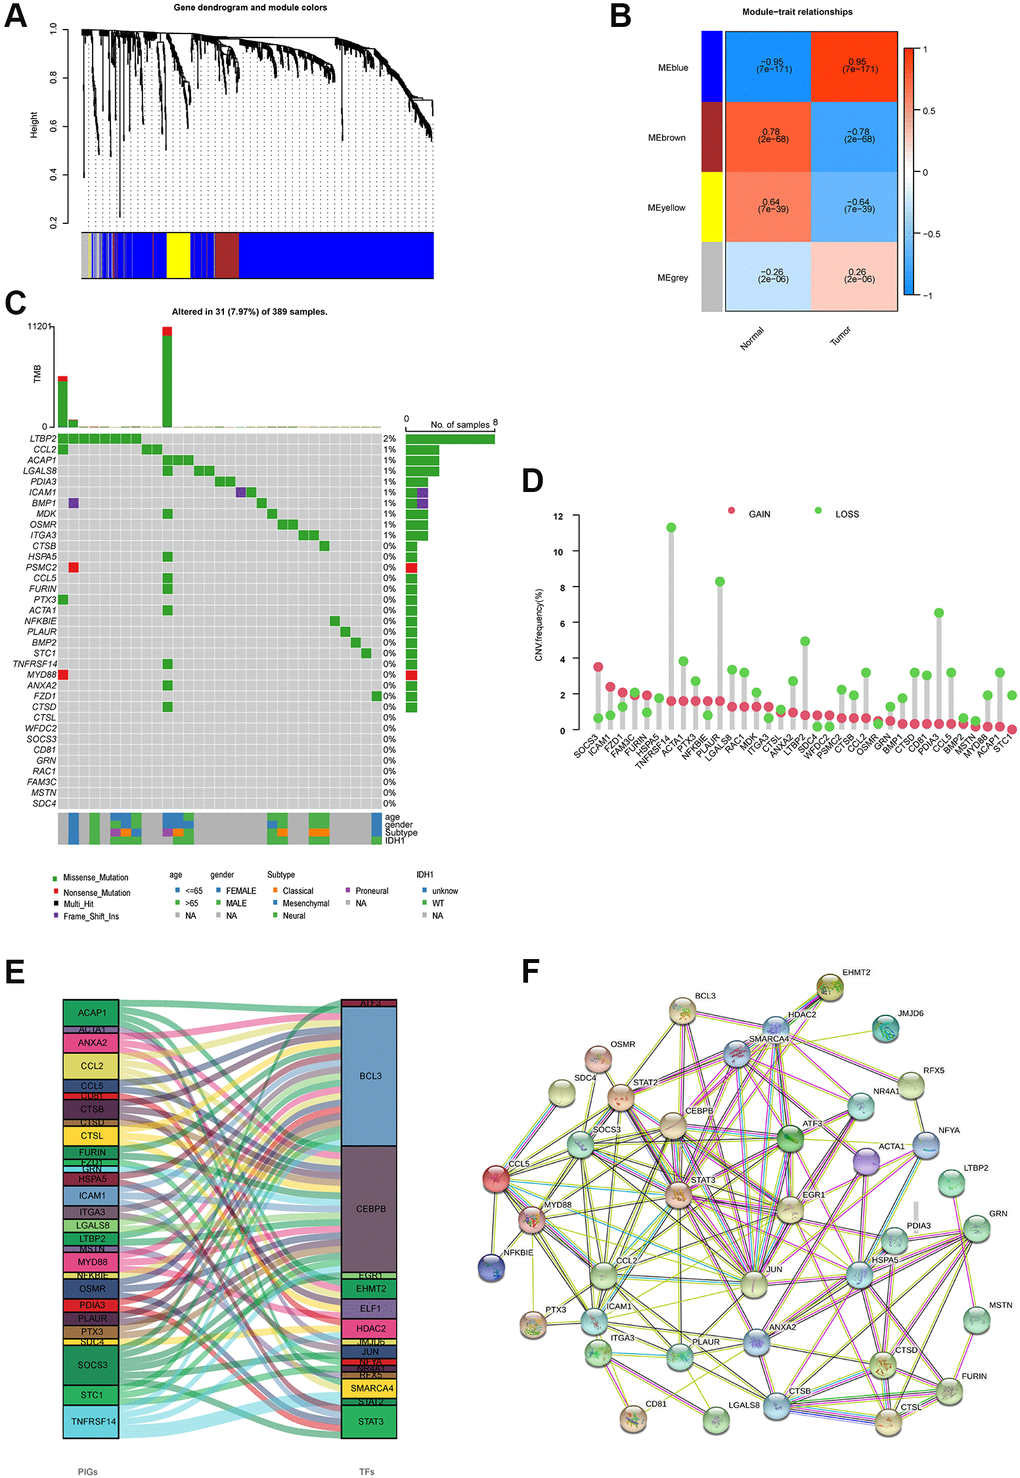 Molecular characterizations of immune-related prognostic genes. (A) Weighted gene coexpression network analysis (WGCNA) of immune-related differentially expressed genes with a soft threshold β = 7. (B) Gene modules related to HNSCC obtained by WGCNA. (C) Mutation frequency of 35 immune-related prognostic genes. (D) CNV variation frequencies of 35 immune-related prognostic genes in the TCGA-GBM cohort. (E) Transcription factors for 35 immune-related prognostic genes. (F) The network of the 35 immune-related prognostic genes.